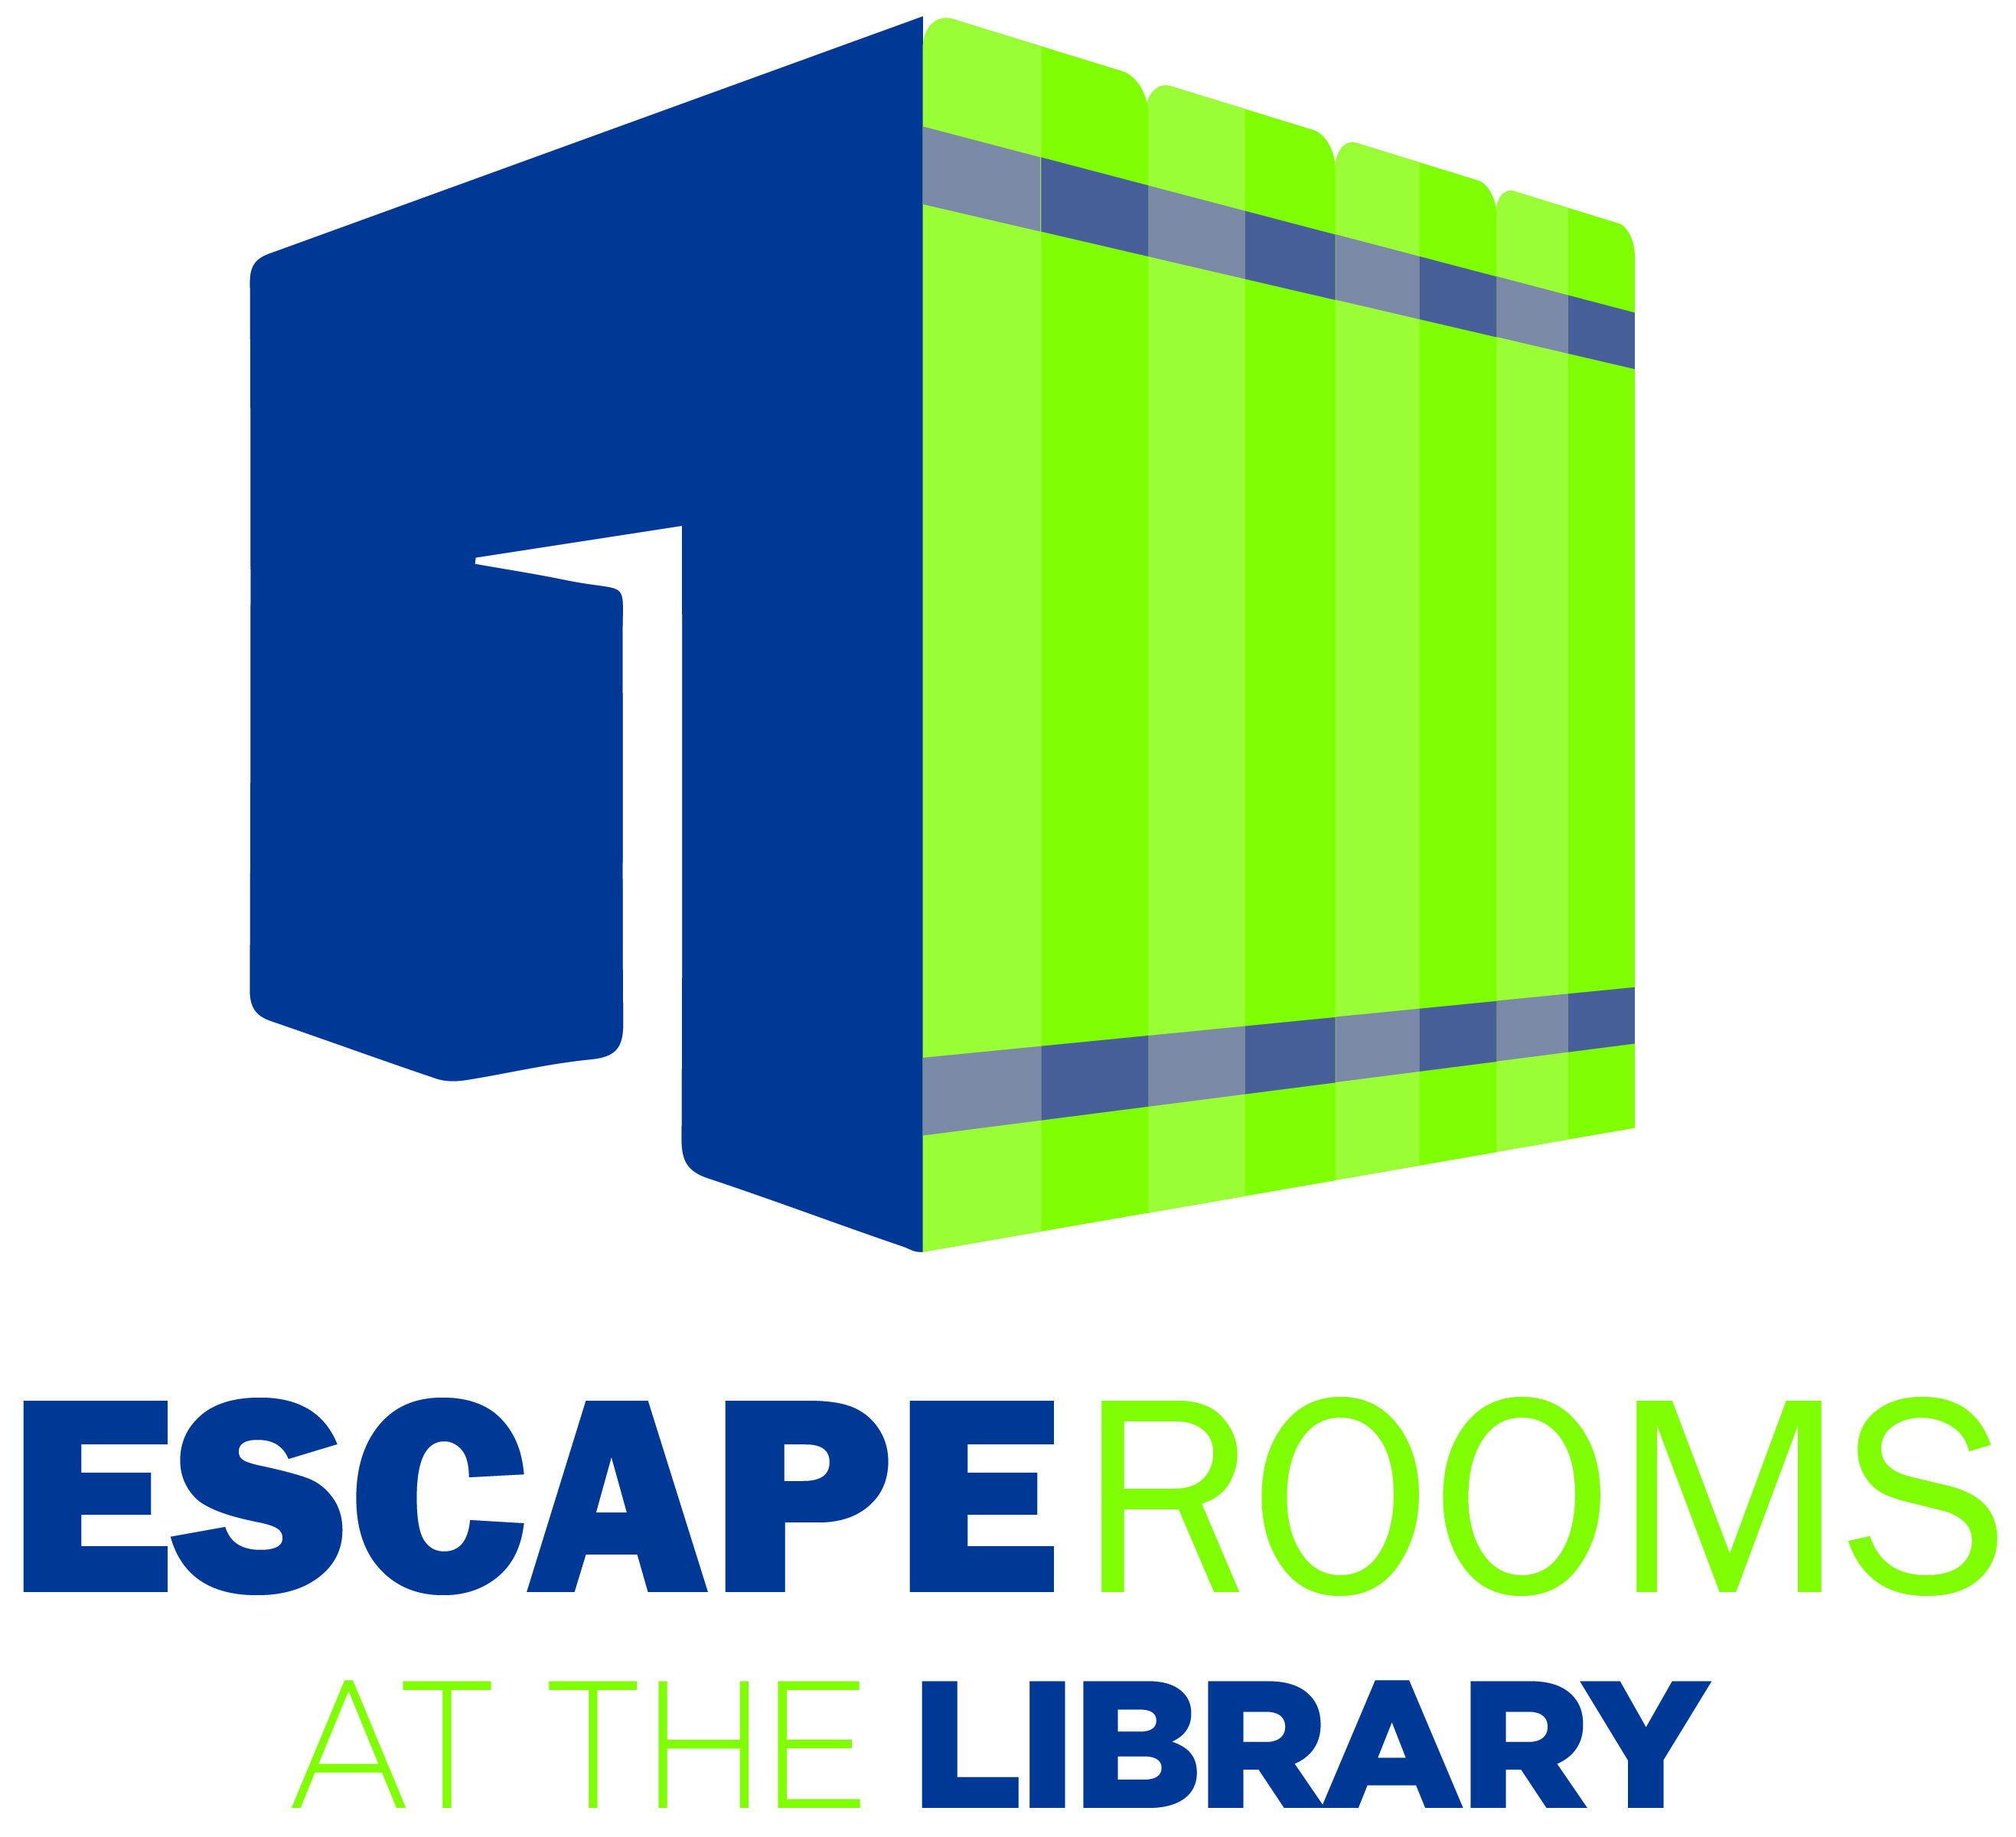 Escape rooms at the library